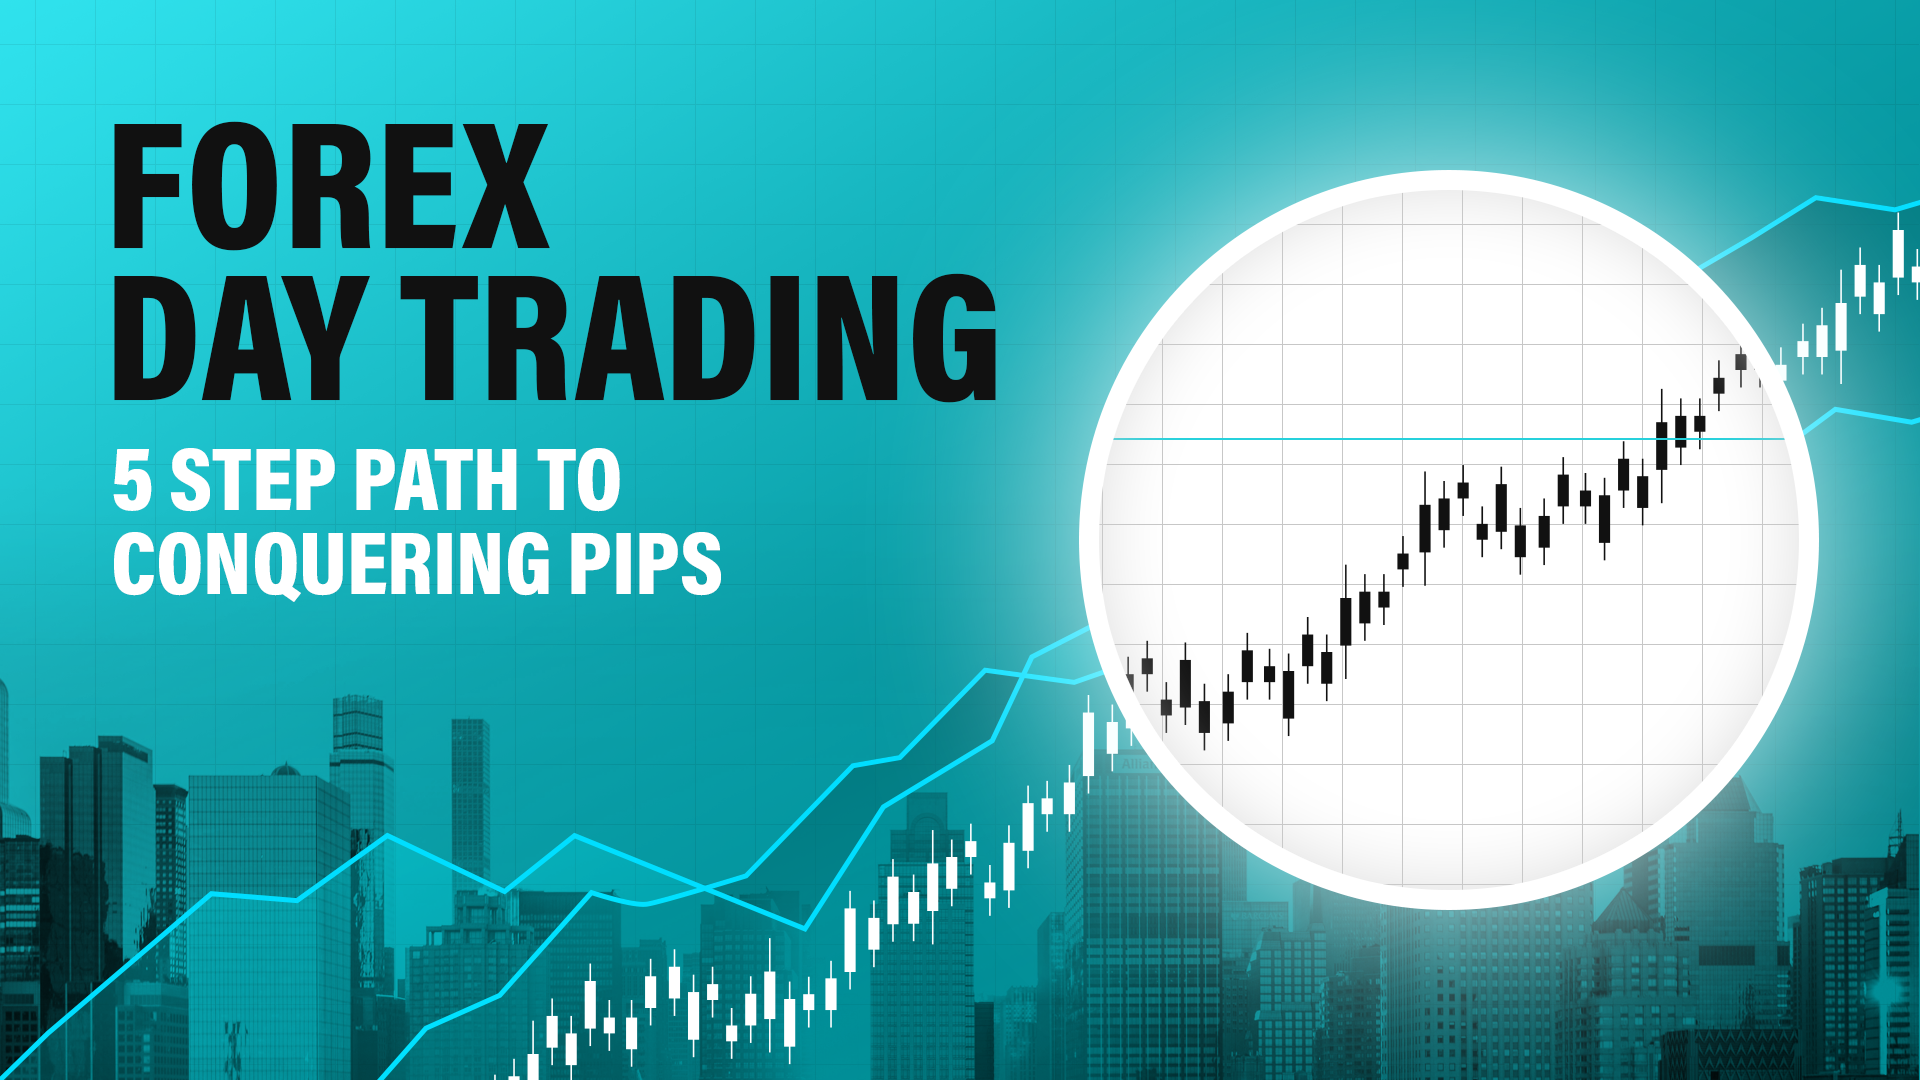 Forex Day Trading | A 5 Step Path to Conquering Pips! - Vladimir Ribakov